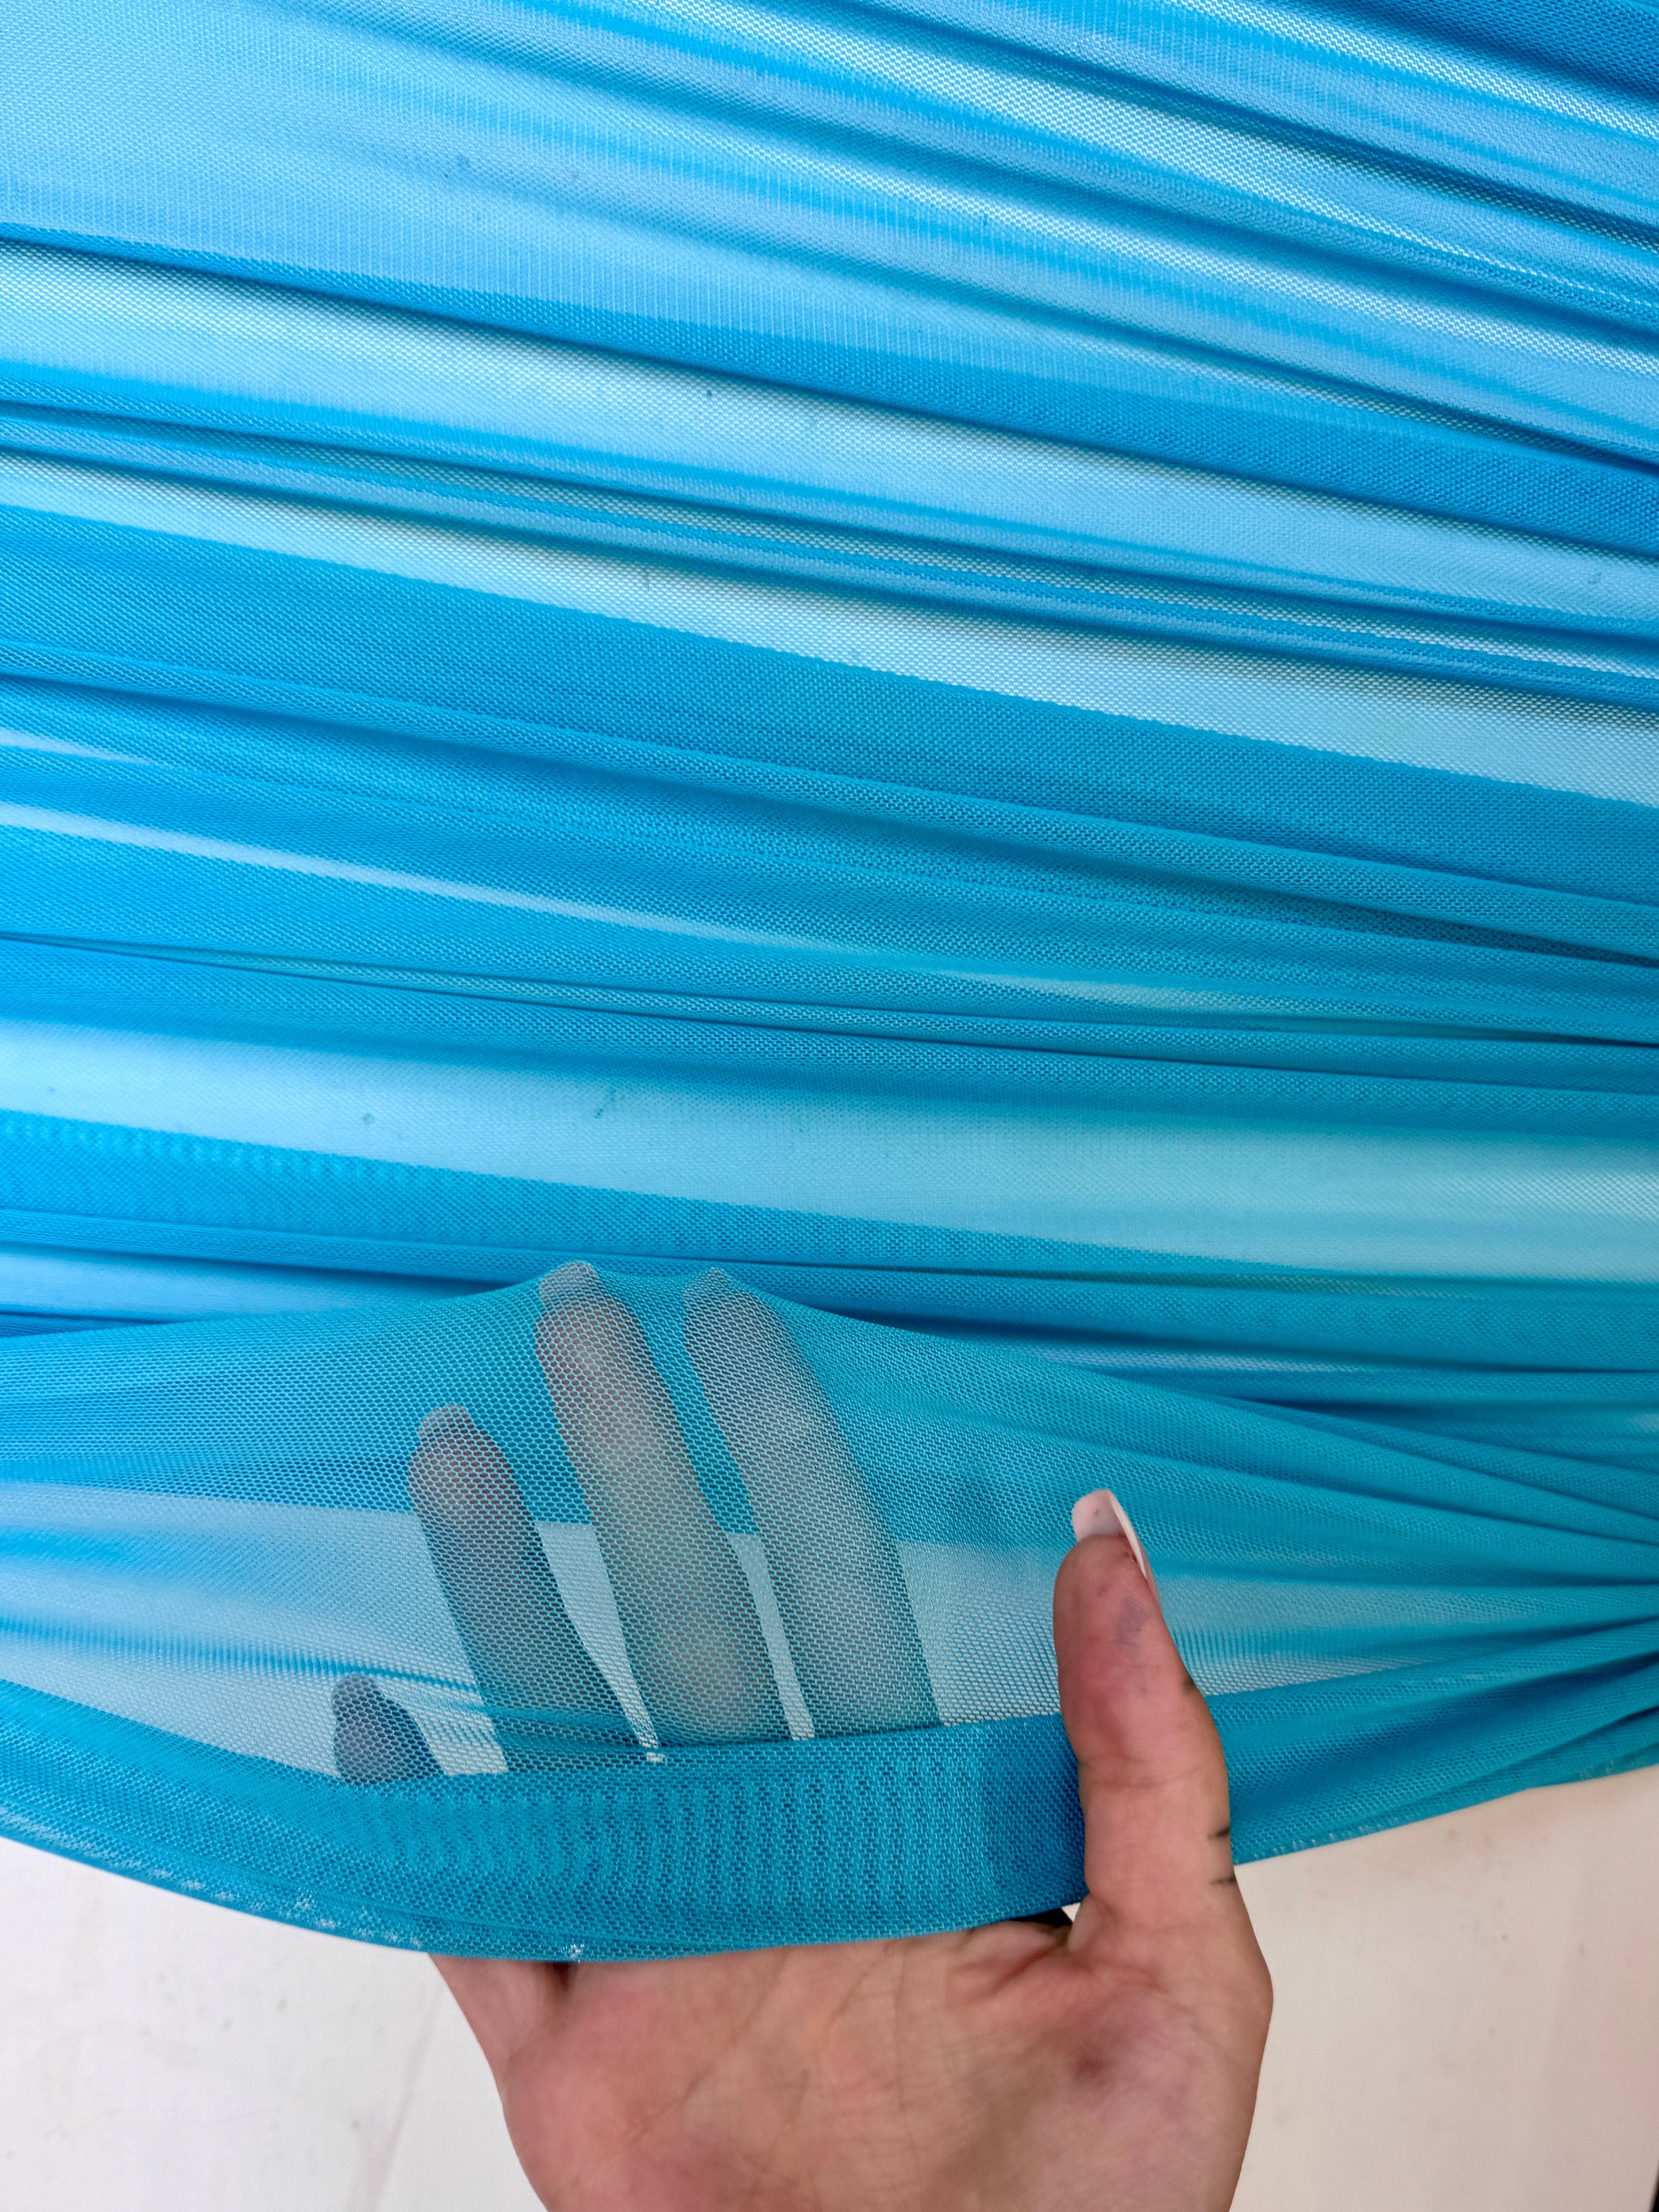 turquoise 4way stretch power mesh, blue power mesh, light blue power mesh, sky blue power mesh